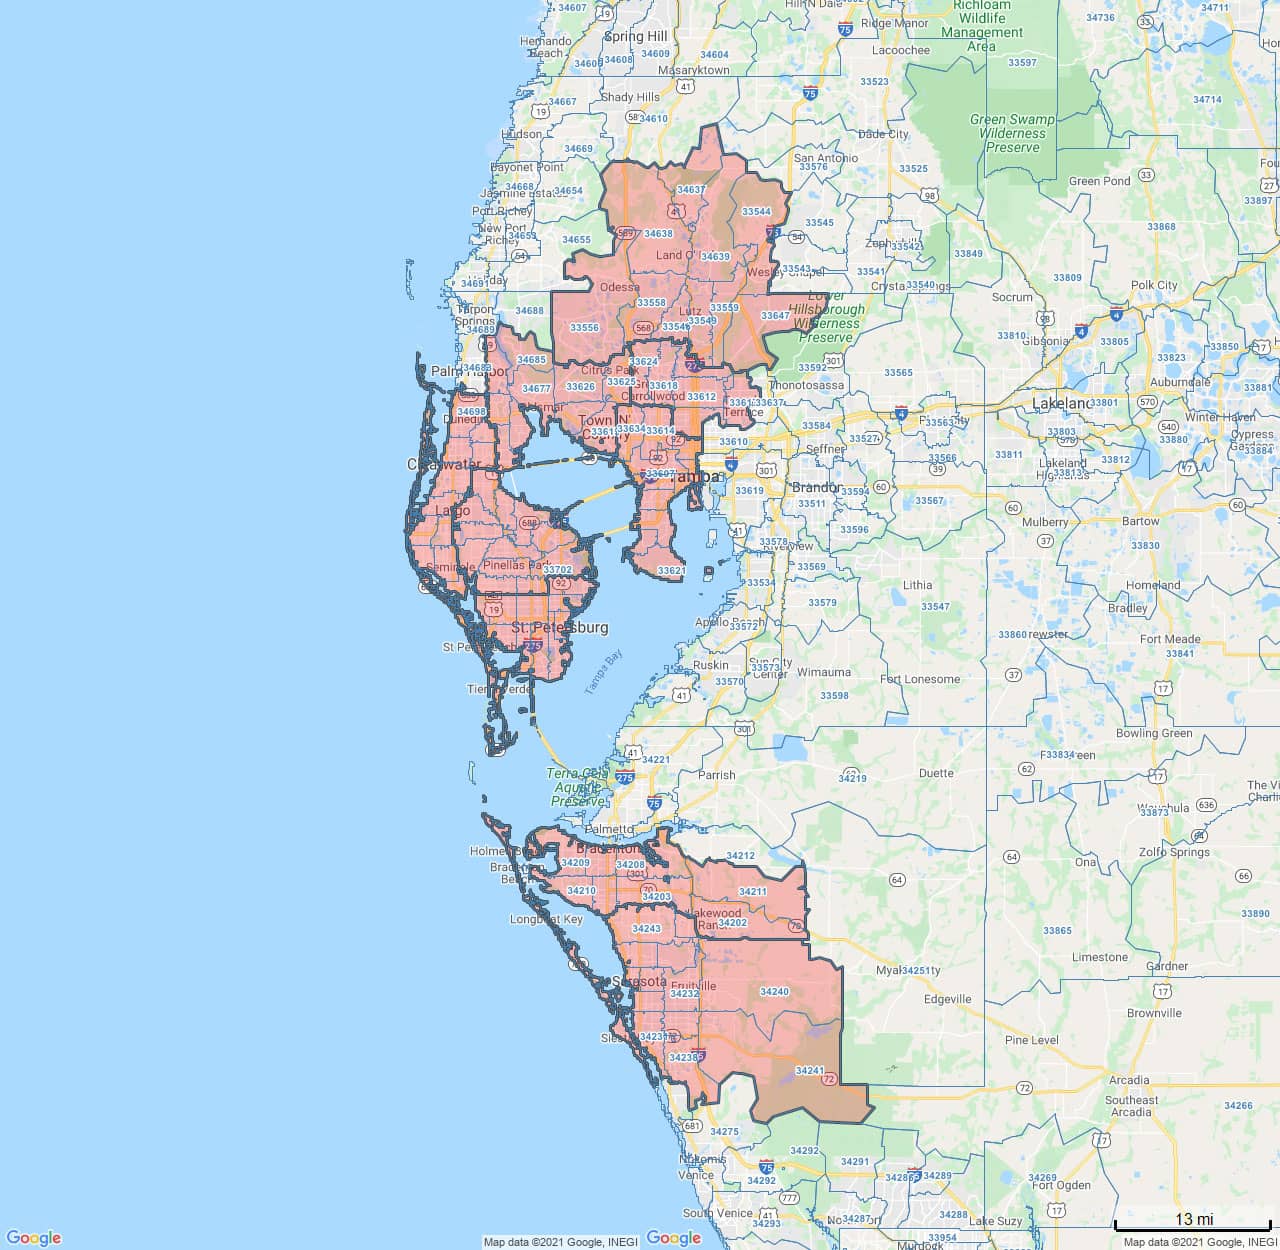 All Dry Services Area Coverage Map for Tampa Bay, FL